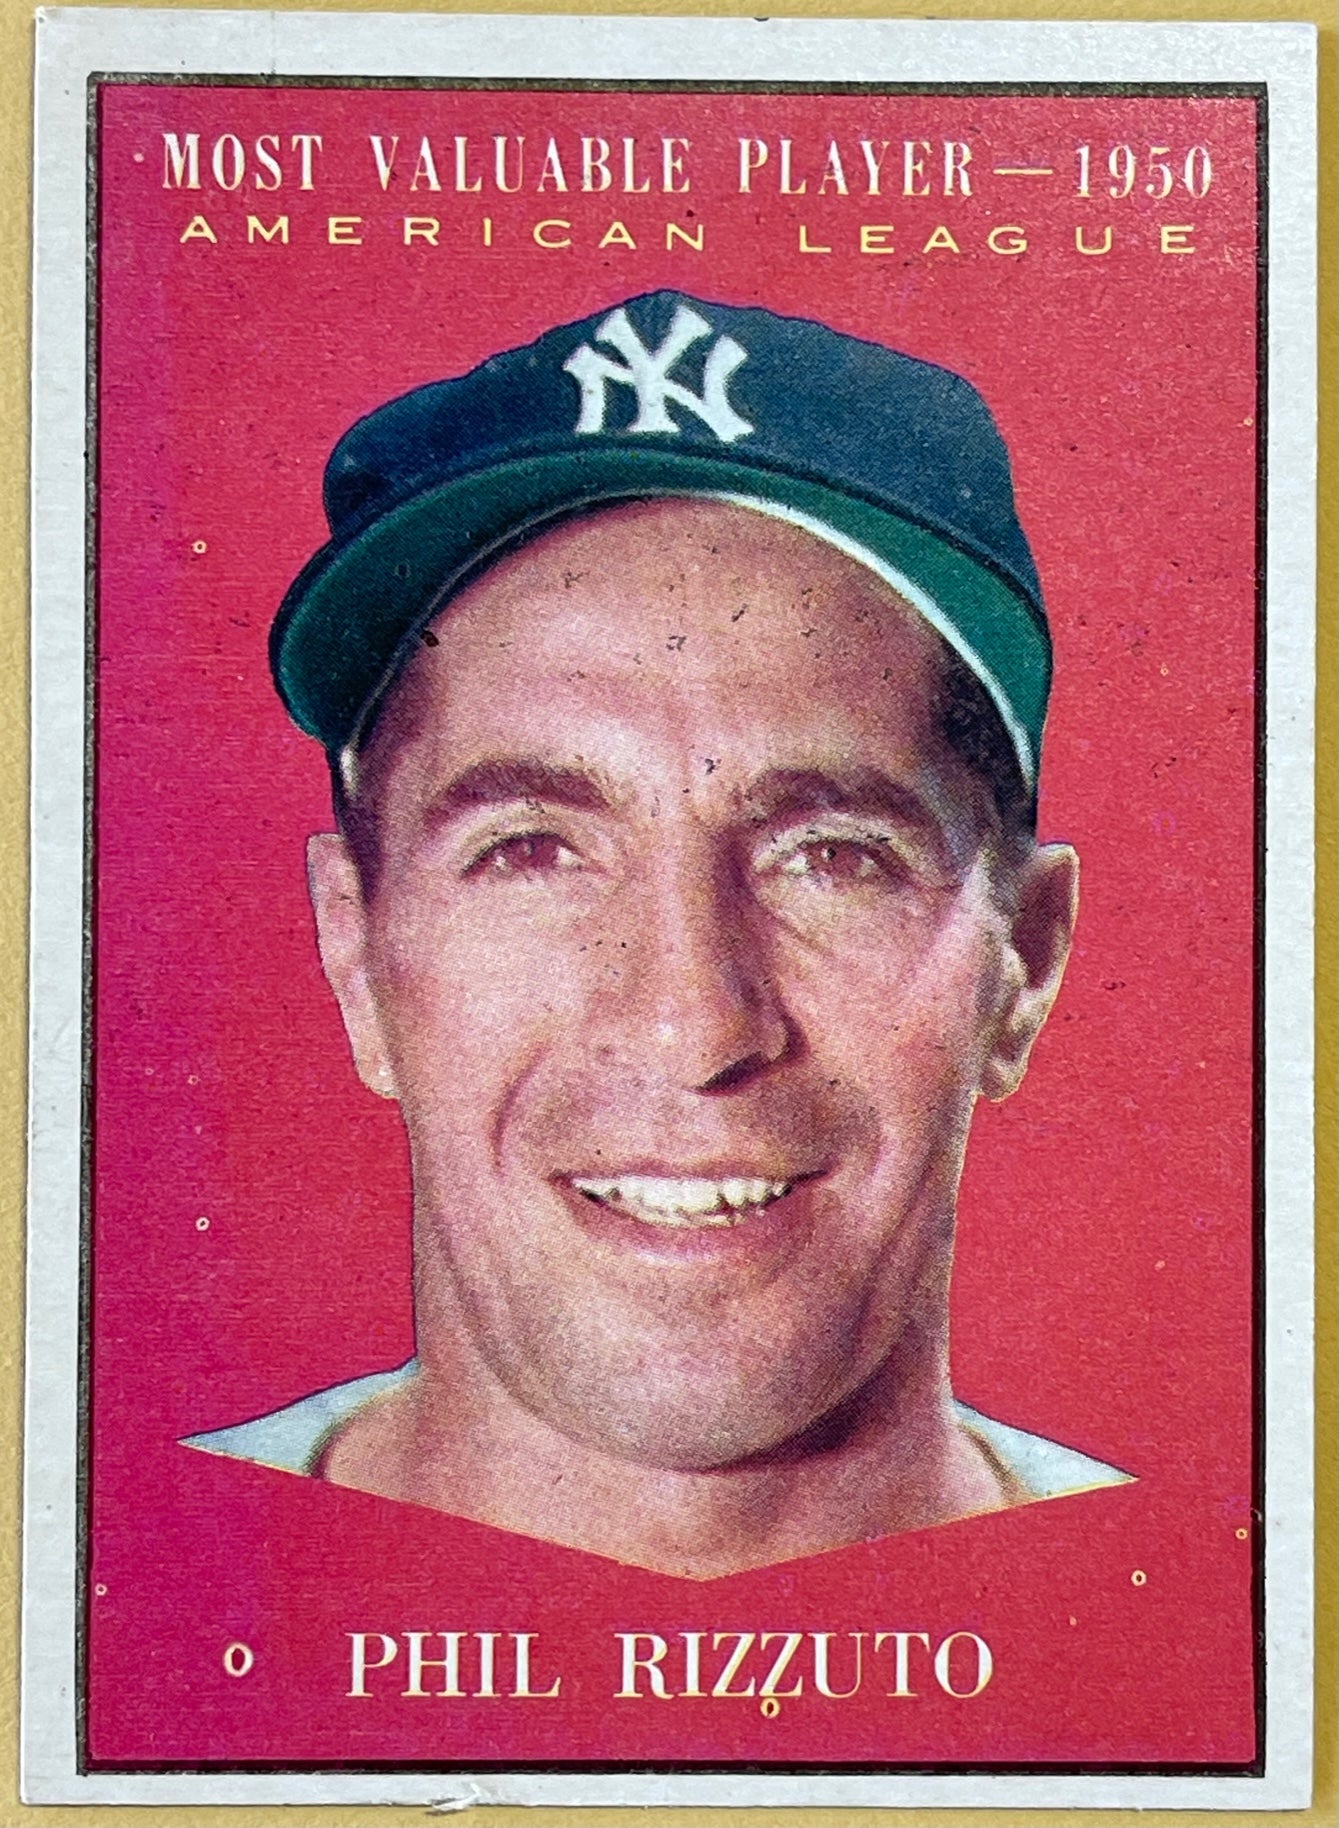 Phil Rizzuto by Mlb Photos